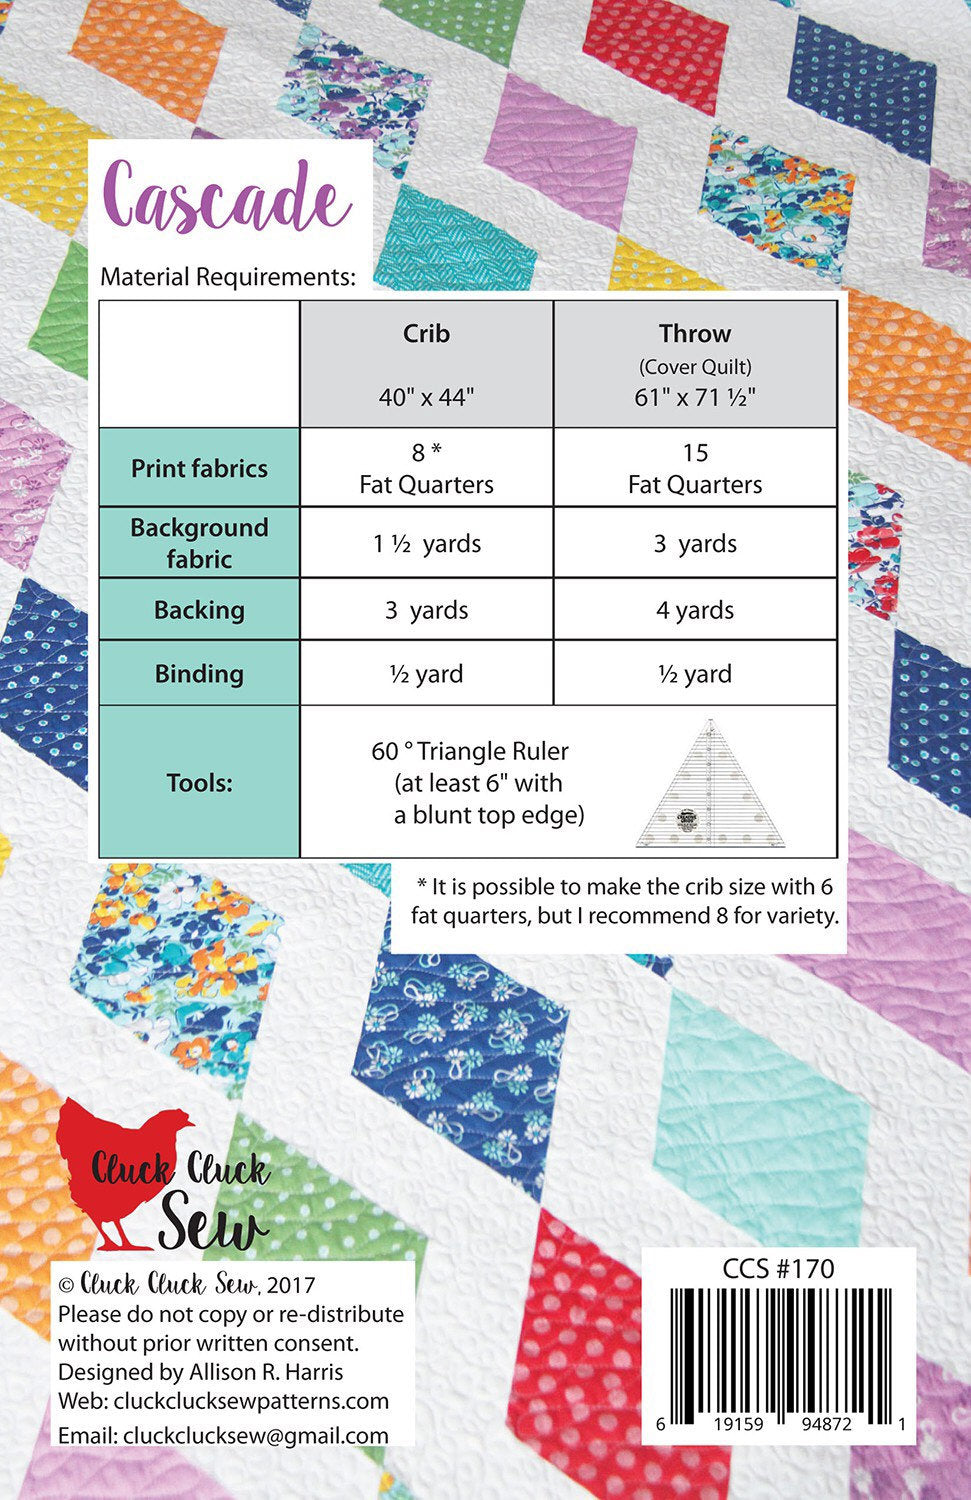 Cascade Quilt Pattern - Cluck Cluck Sew - Fat Quarter Friendly - 2 Sizes - Uses a 60 degree triangle ruler